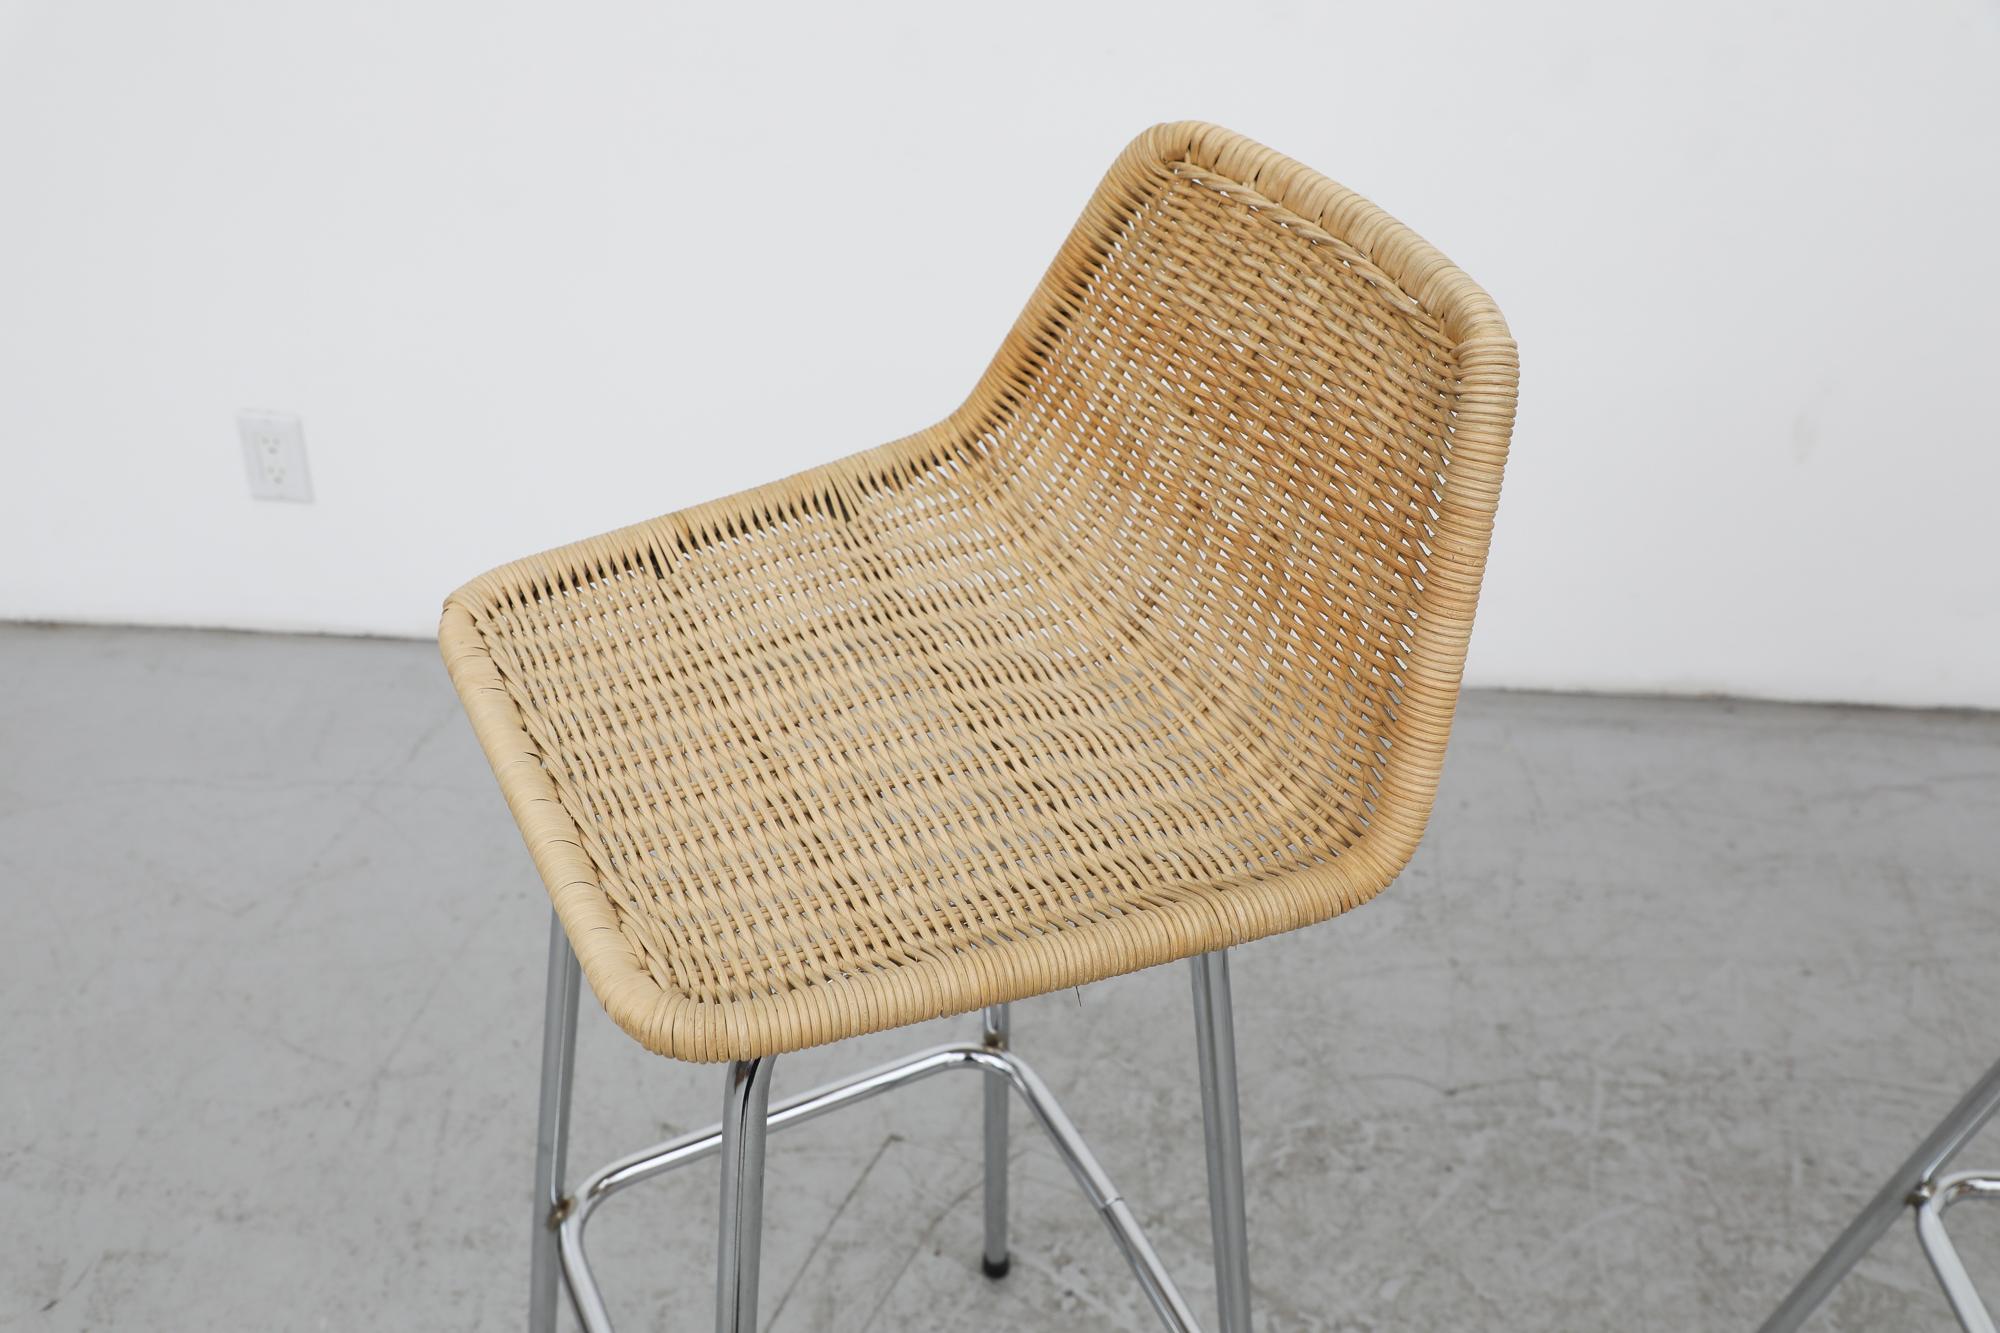 Metal Charlotte Perriand Style Wicker Bar Stools With Angled Back